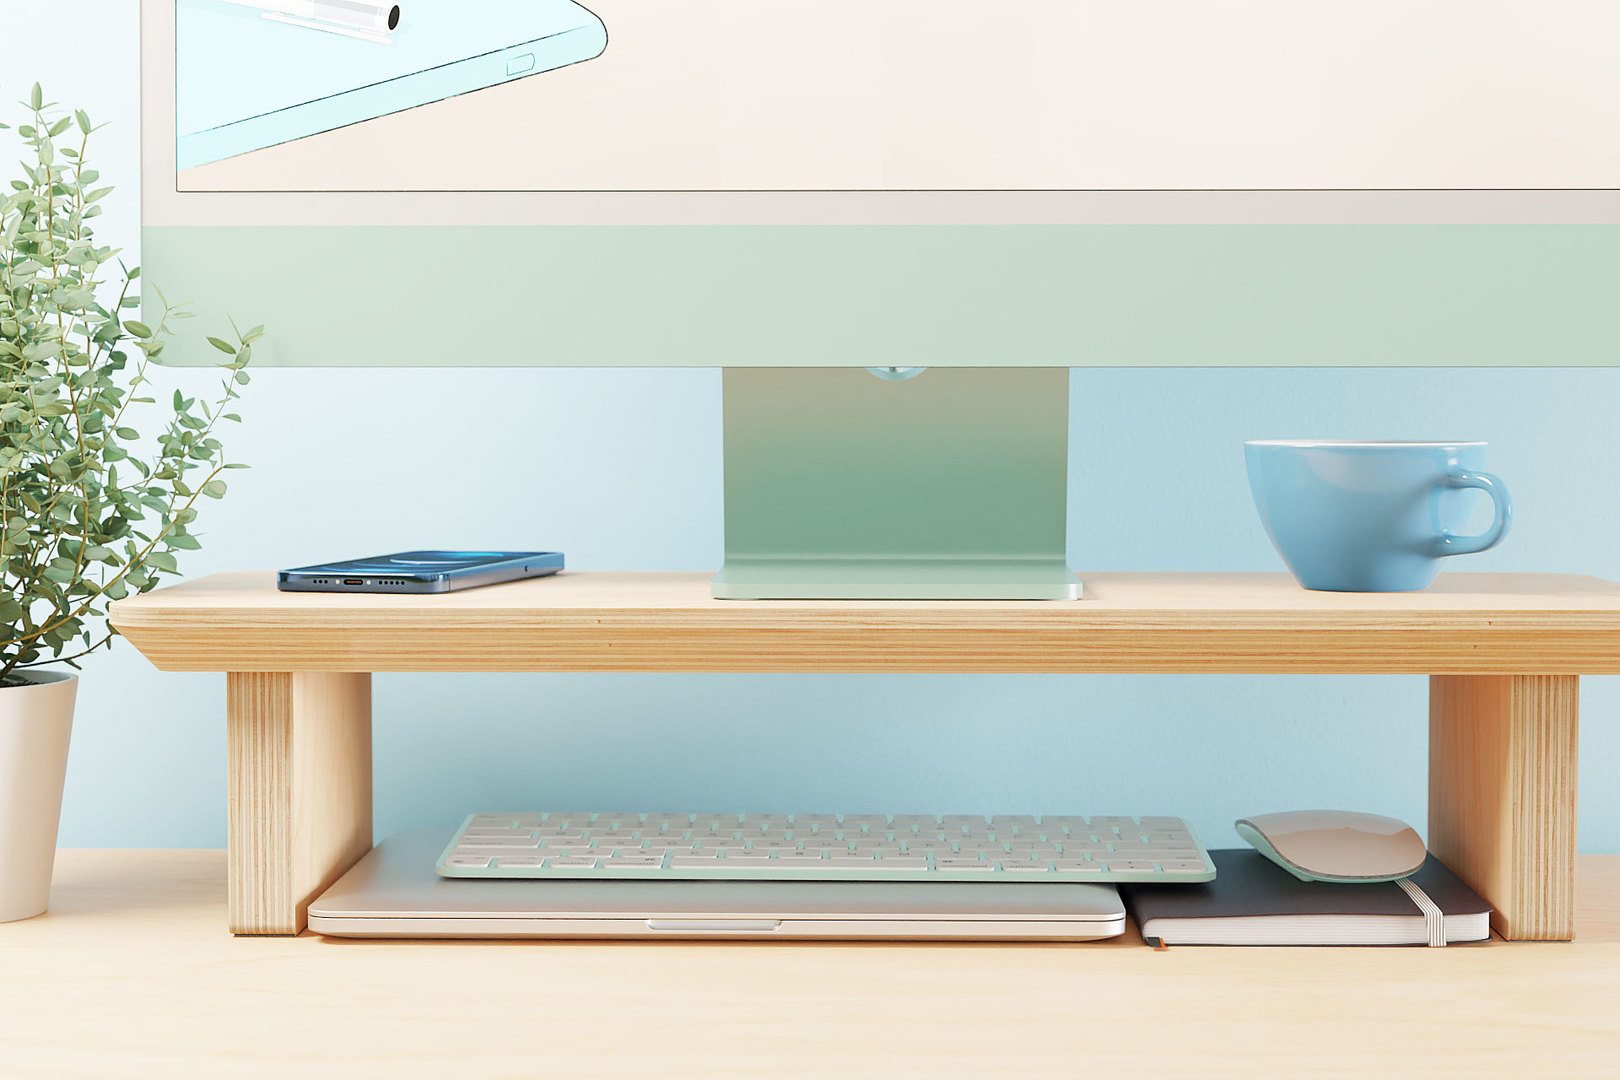 A front on view of the Ecosium medium size sustainable timber desk shelf against a blue wall with a green iMac on top, and a Macbook, keyboard and mouse stored underneath